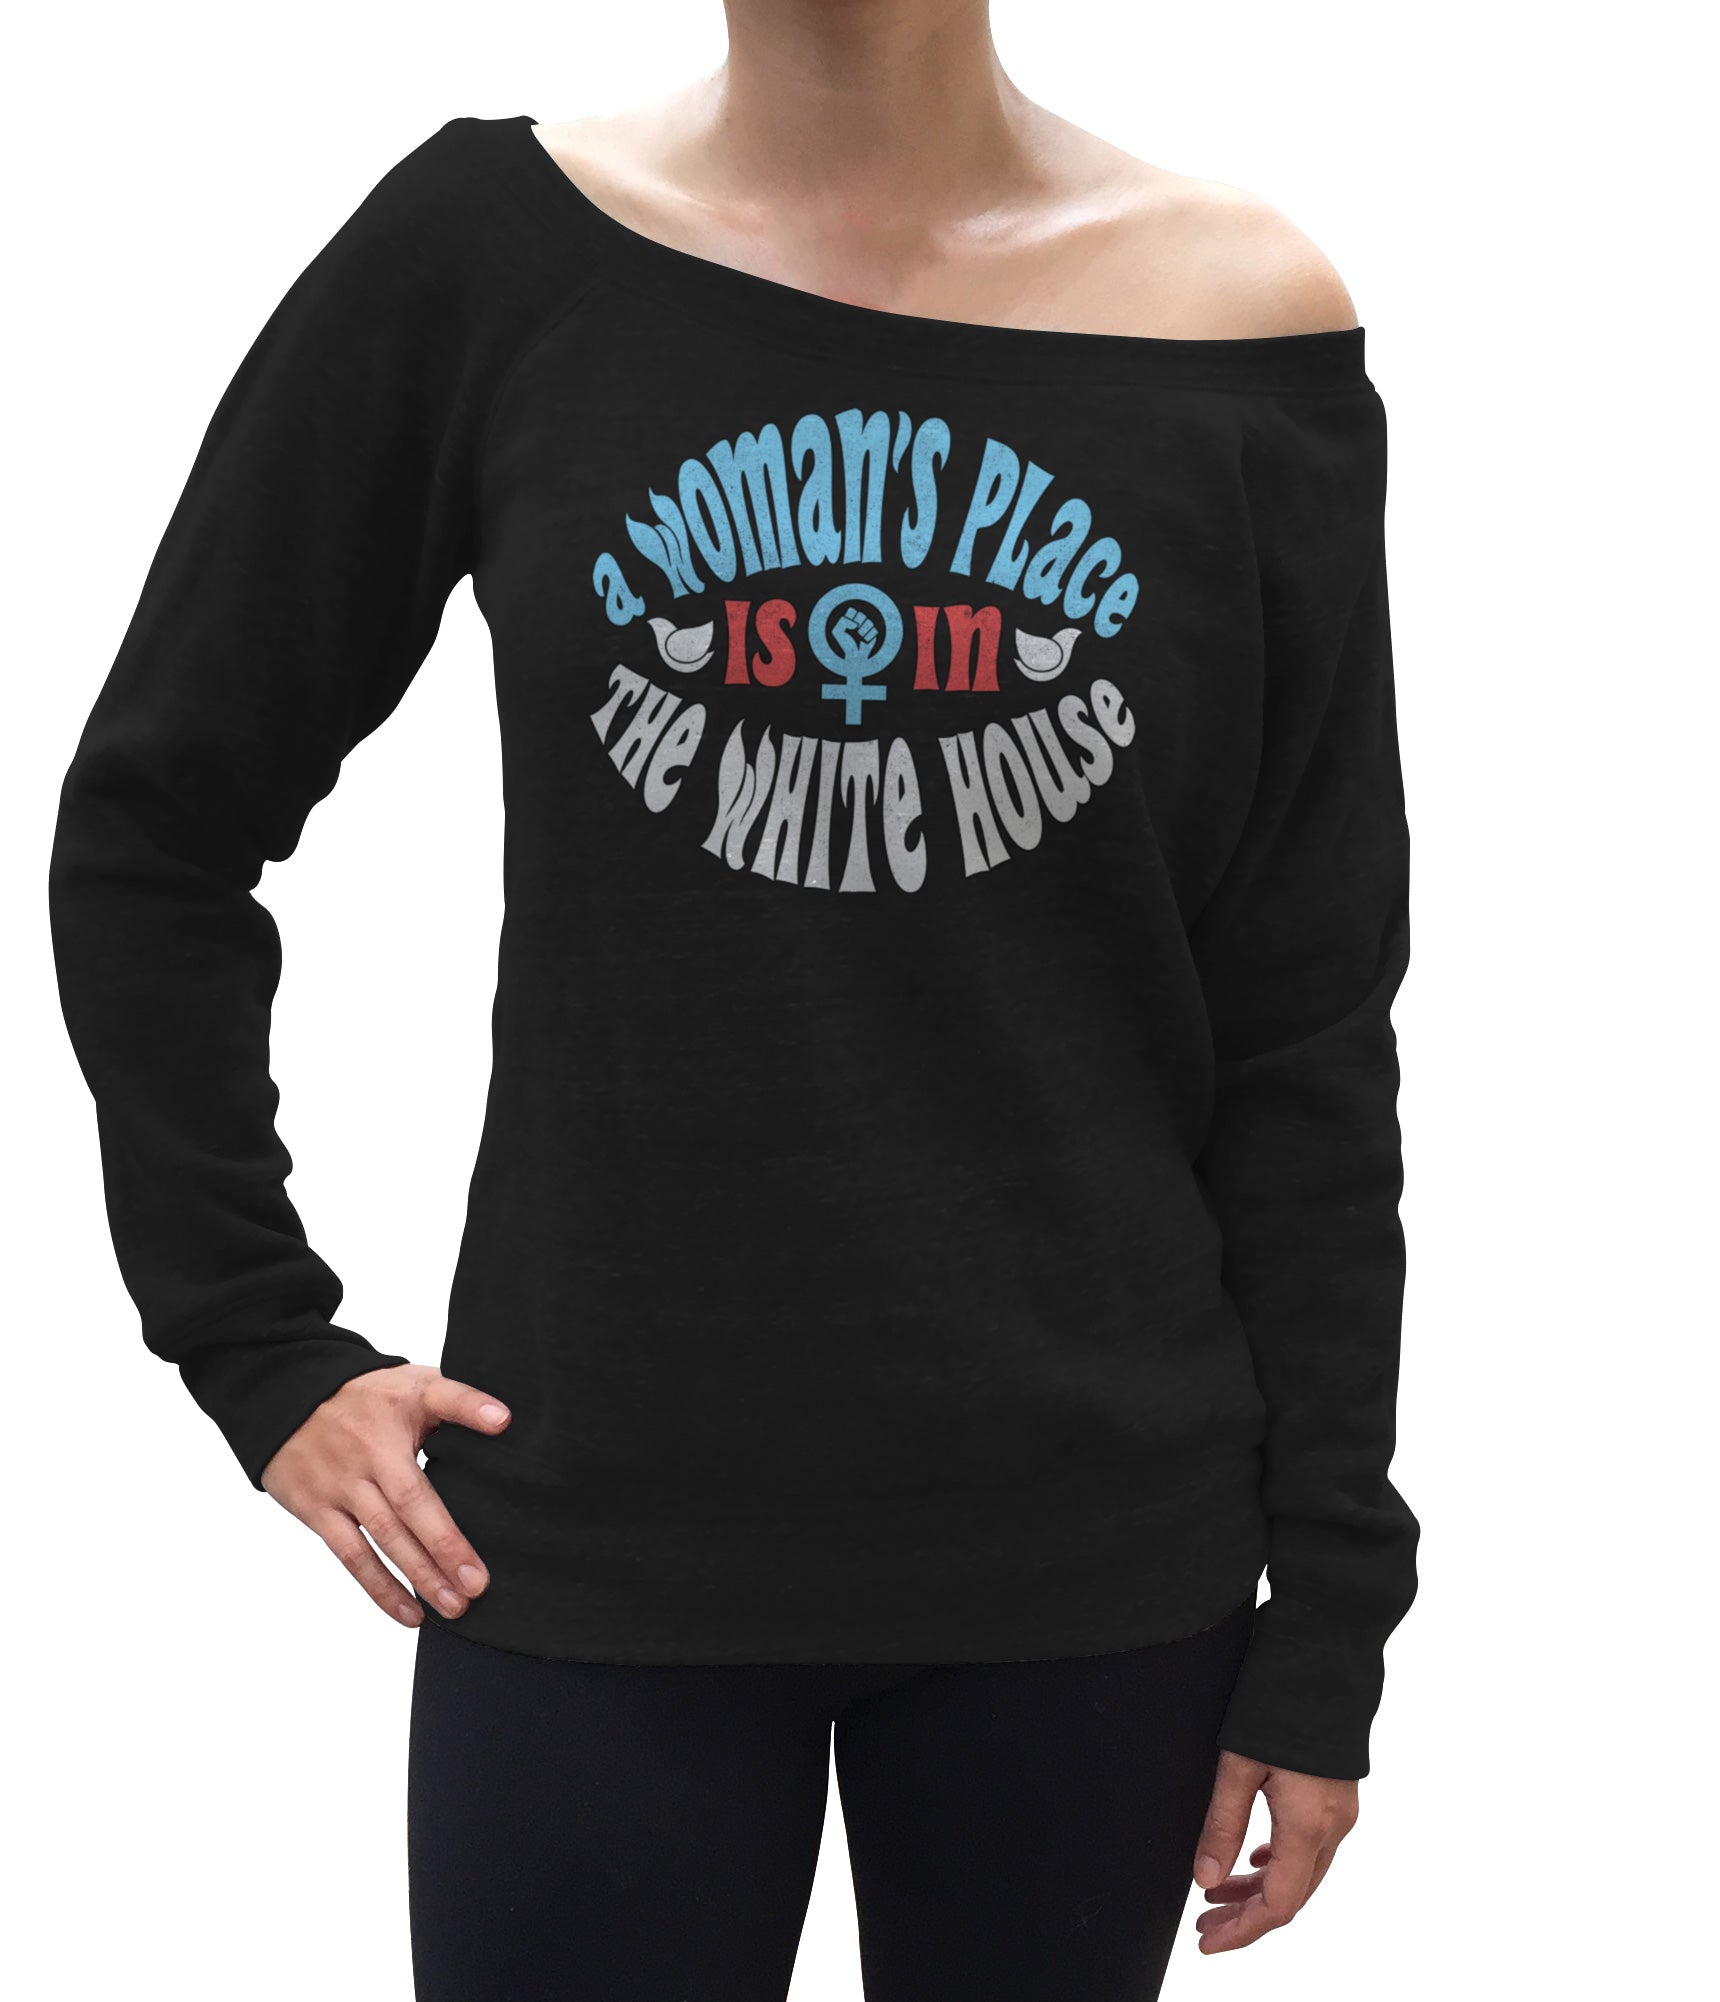 Women's A Woman's Place is in The White House Scoop Neck Fleece